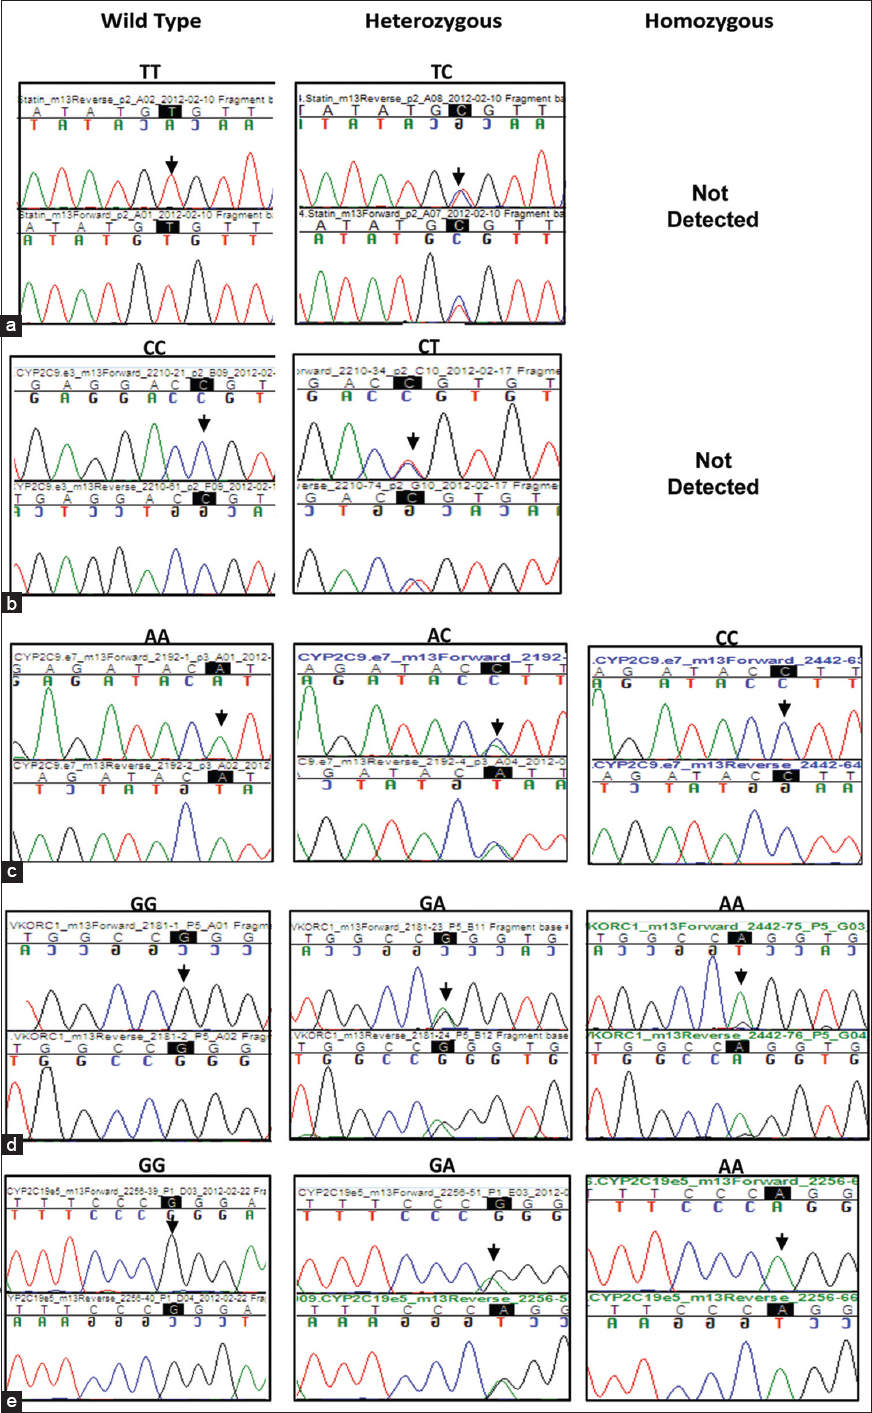 Figure 3: Chromatogram showing the presence of different variants in the genes tested: (a) <i>SLCO1B1</i> (c. 521T > C) (b) <i>CYP2C9</i>*2 (c. 430C > T)c) <i>CYP2C9*</i>3 (c. 1075A > C) (d) <i>VKORC1</i> (c.-1639 G > A)e) <i>CYP2C19*</i>2 (c. 681G > A, exon 5). Chromatogram of the region flanking each variant is highlighted as well as indicated by an arrow over the chromatogram